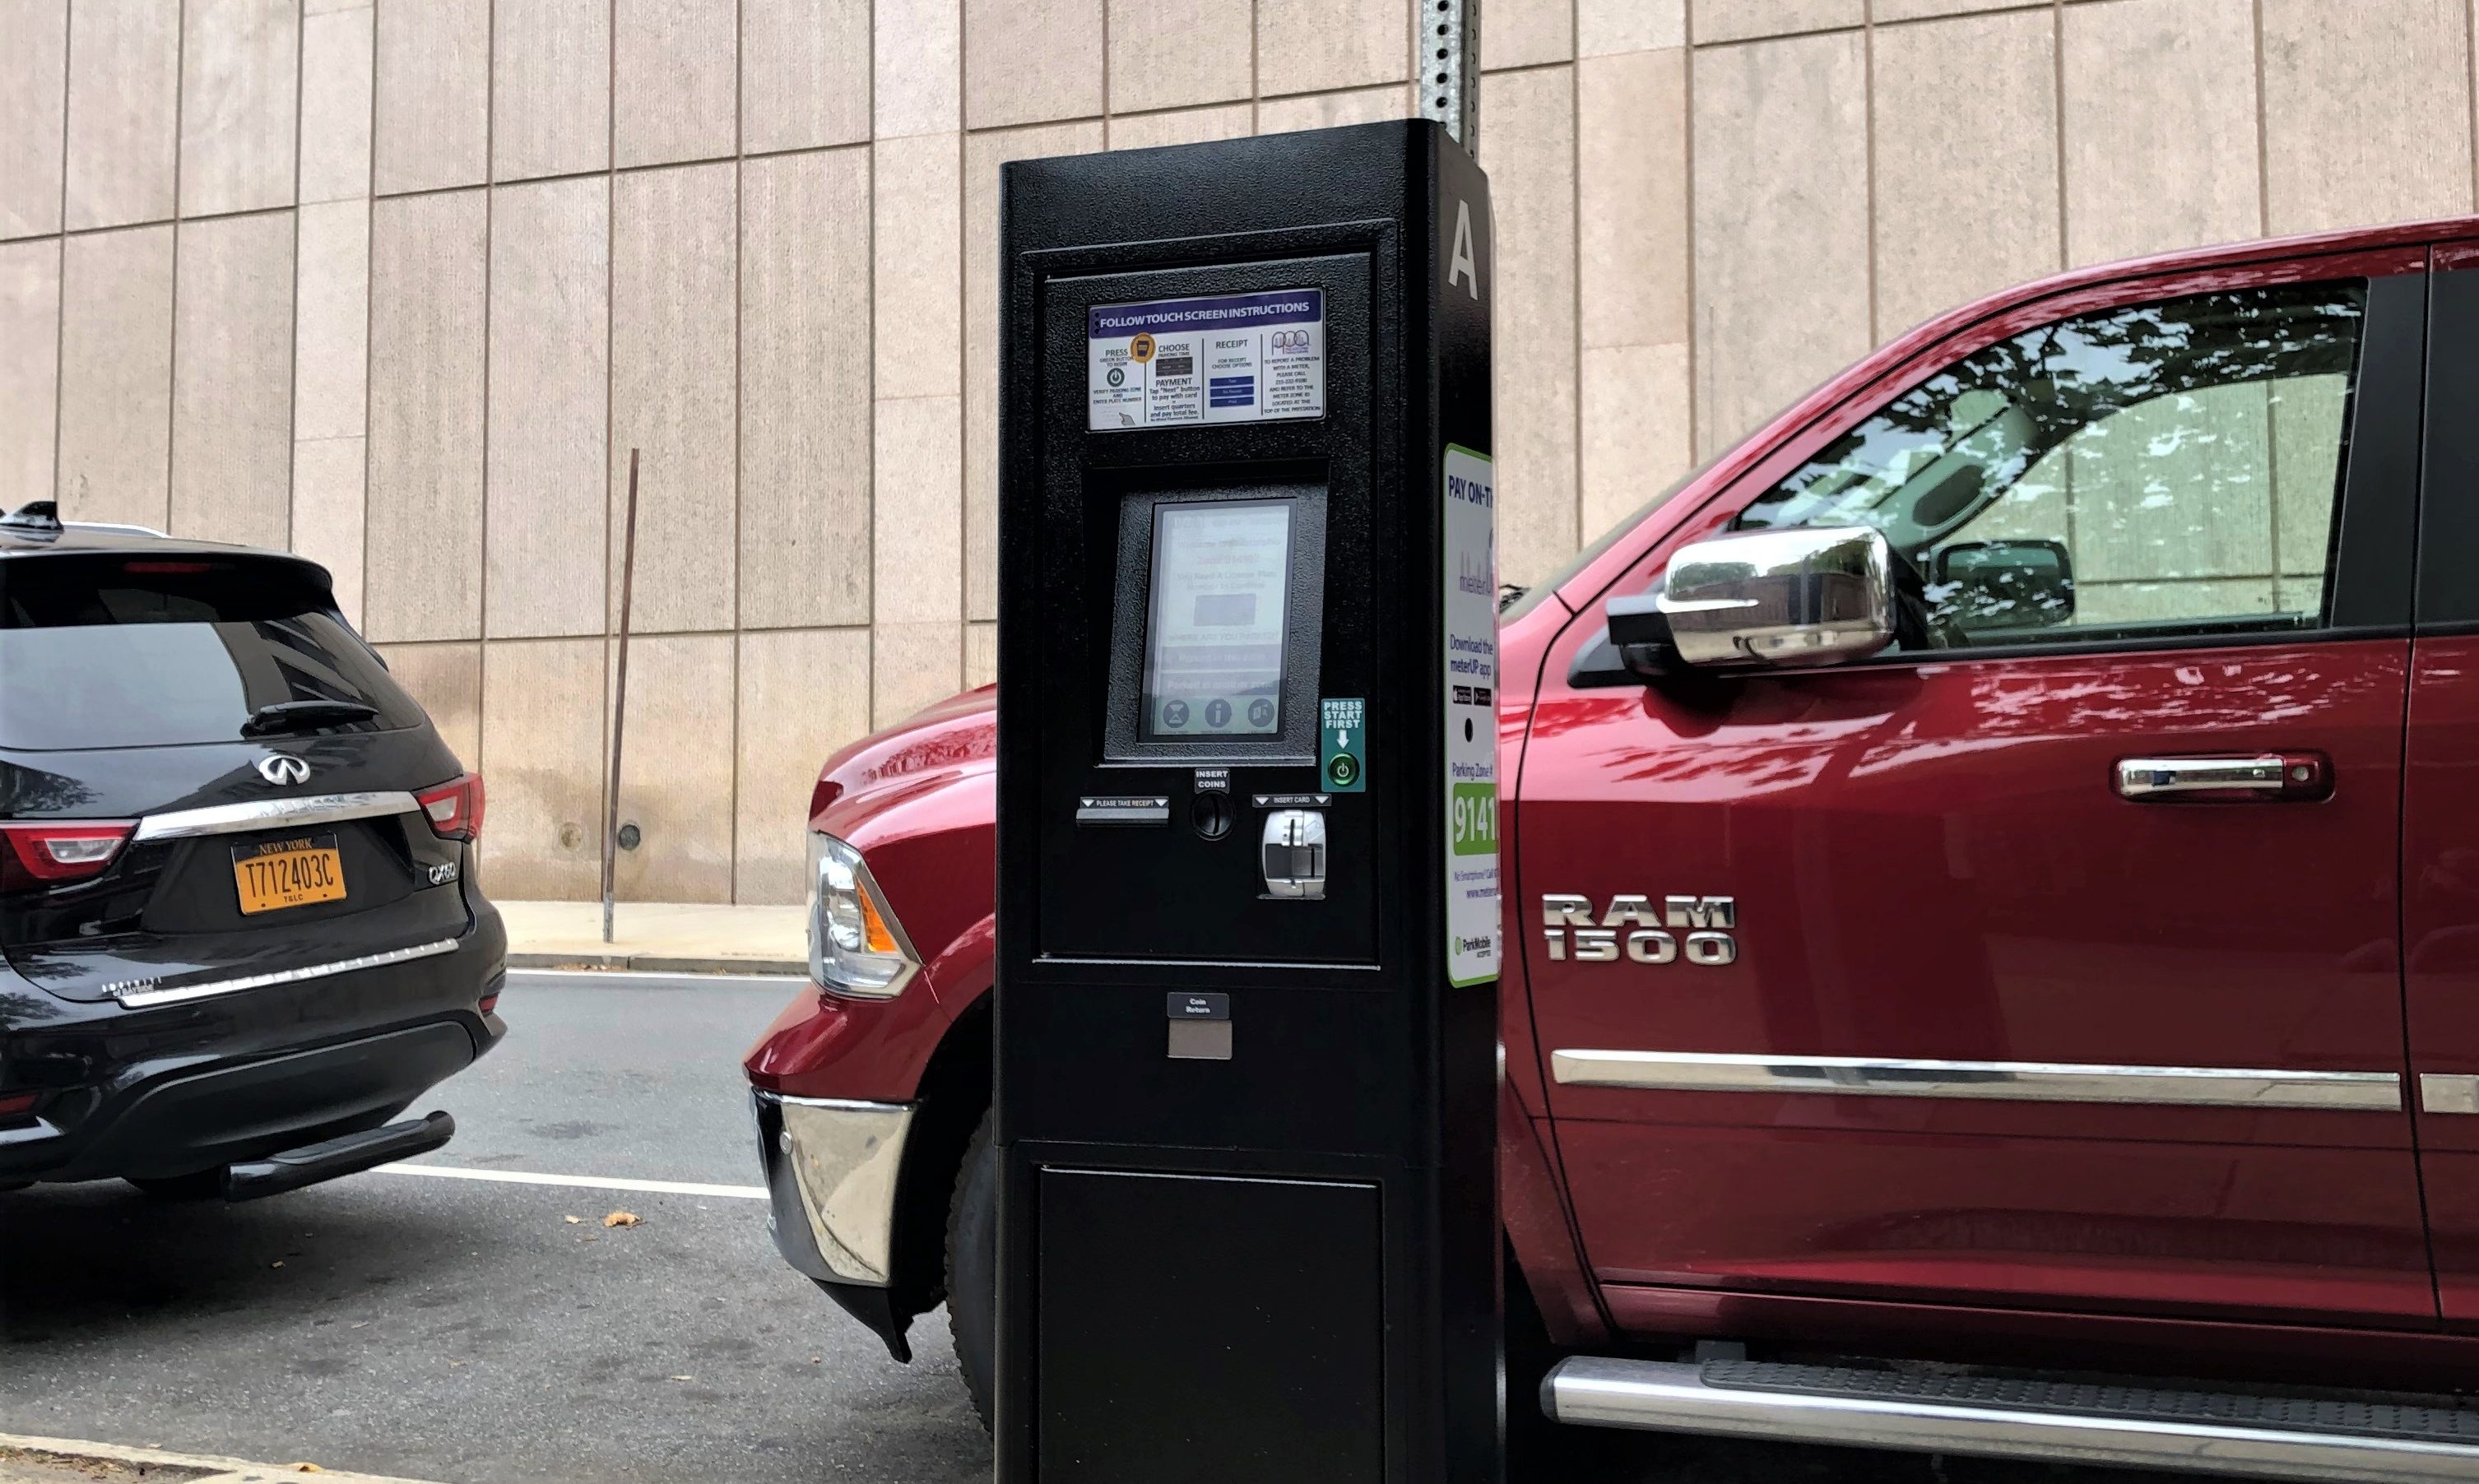 Flowbird's advanced parking management system will replace 1,110 existing parking kiosks in Philadelphia’s downtown core.